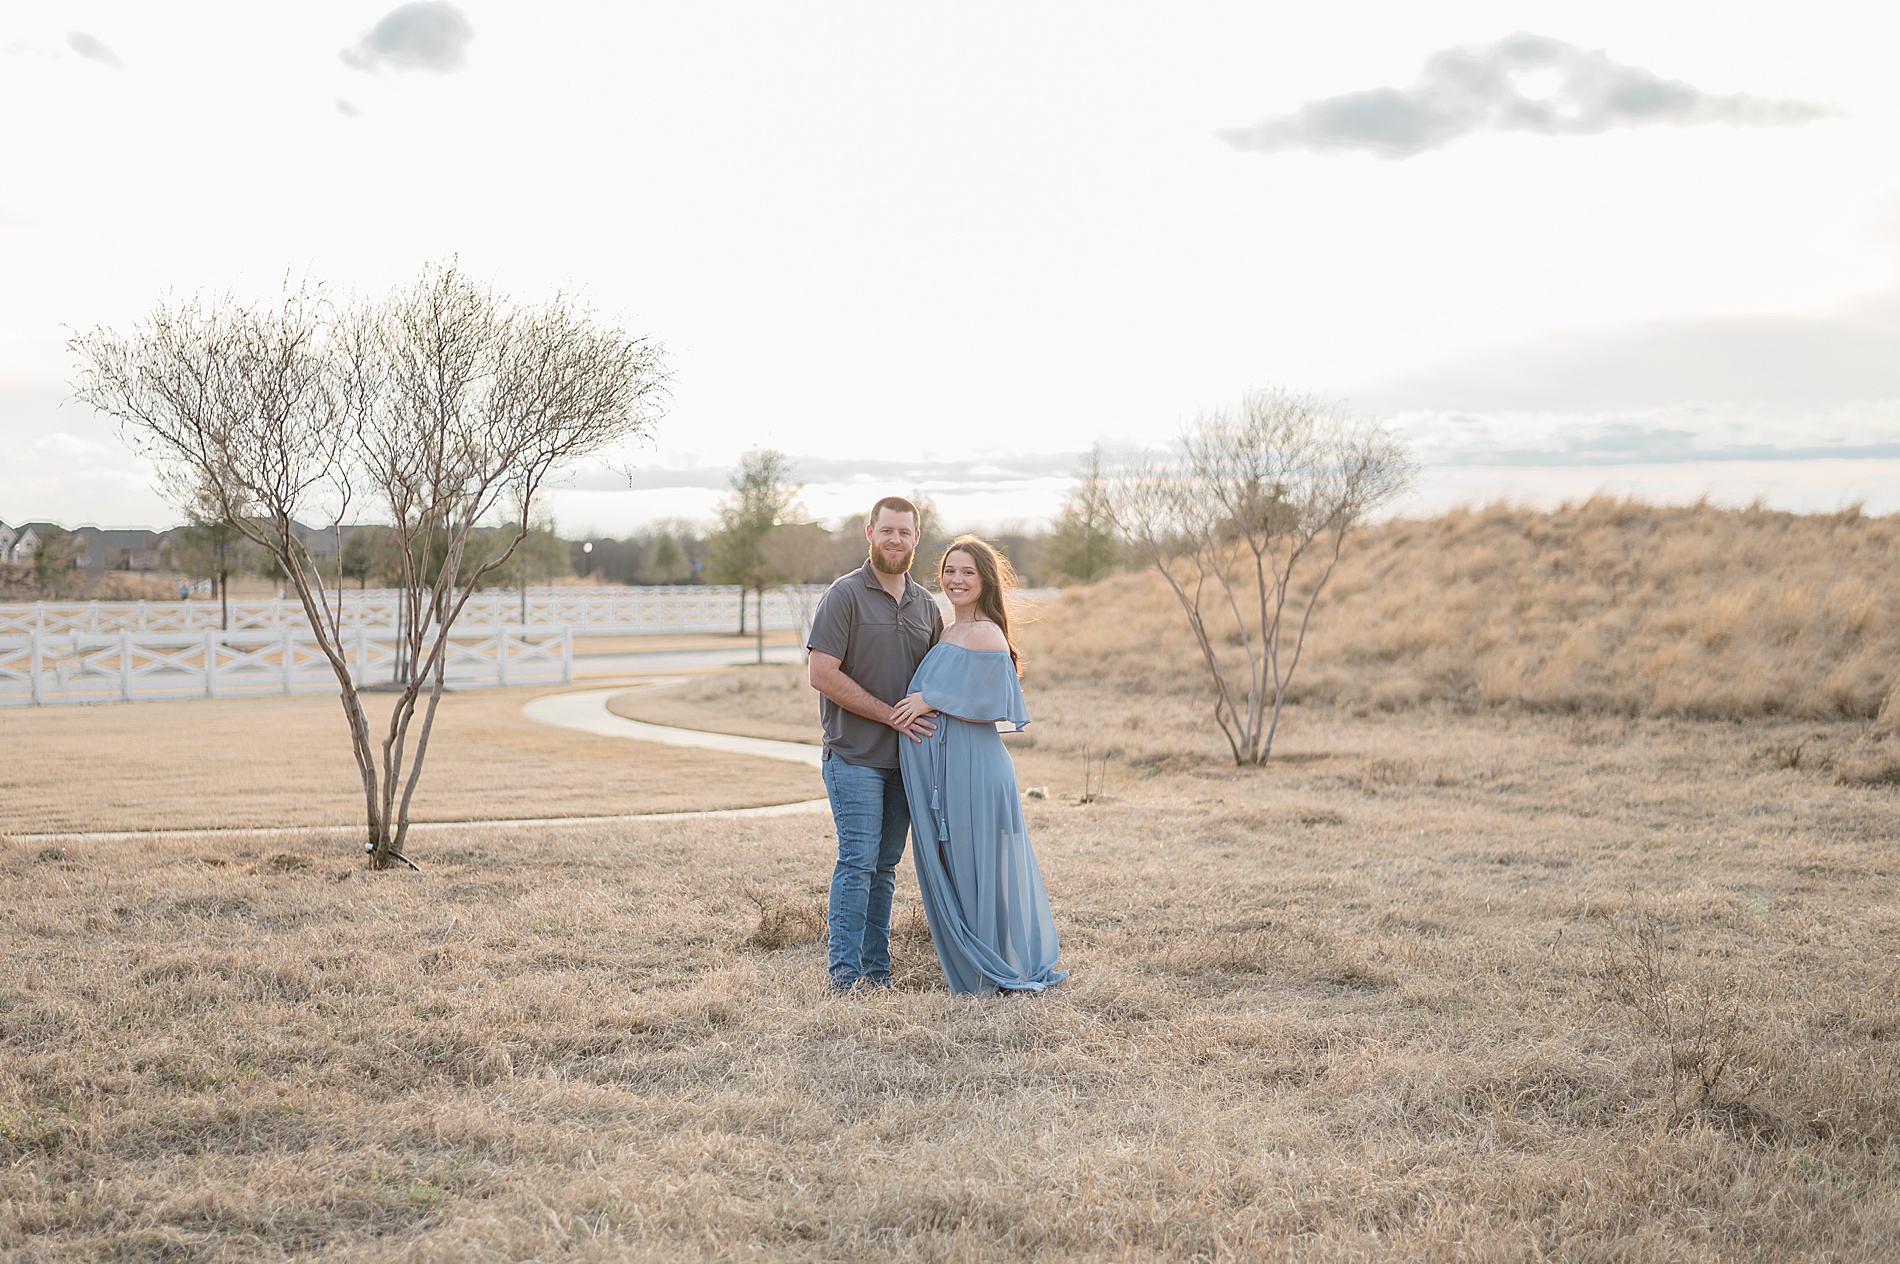 light and airy maternity portraits at The Carriage house  photographed by Lindsey Dutton Photography, a Dallas Family photographer
